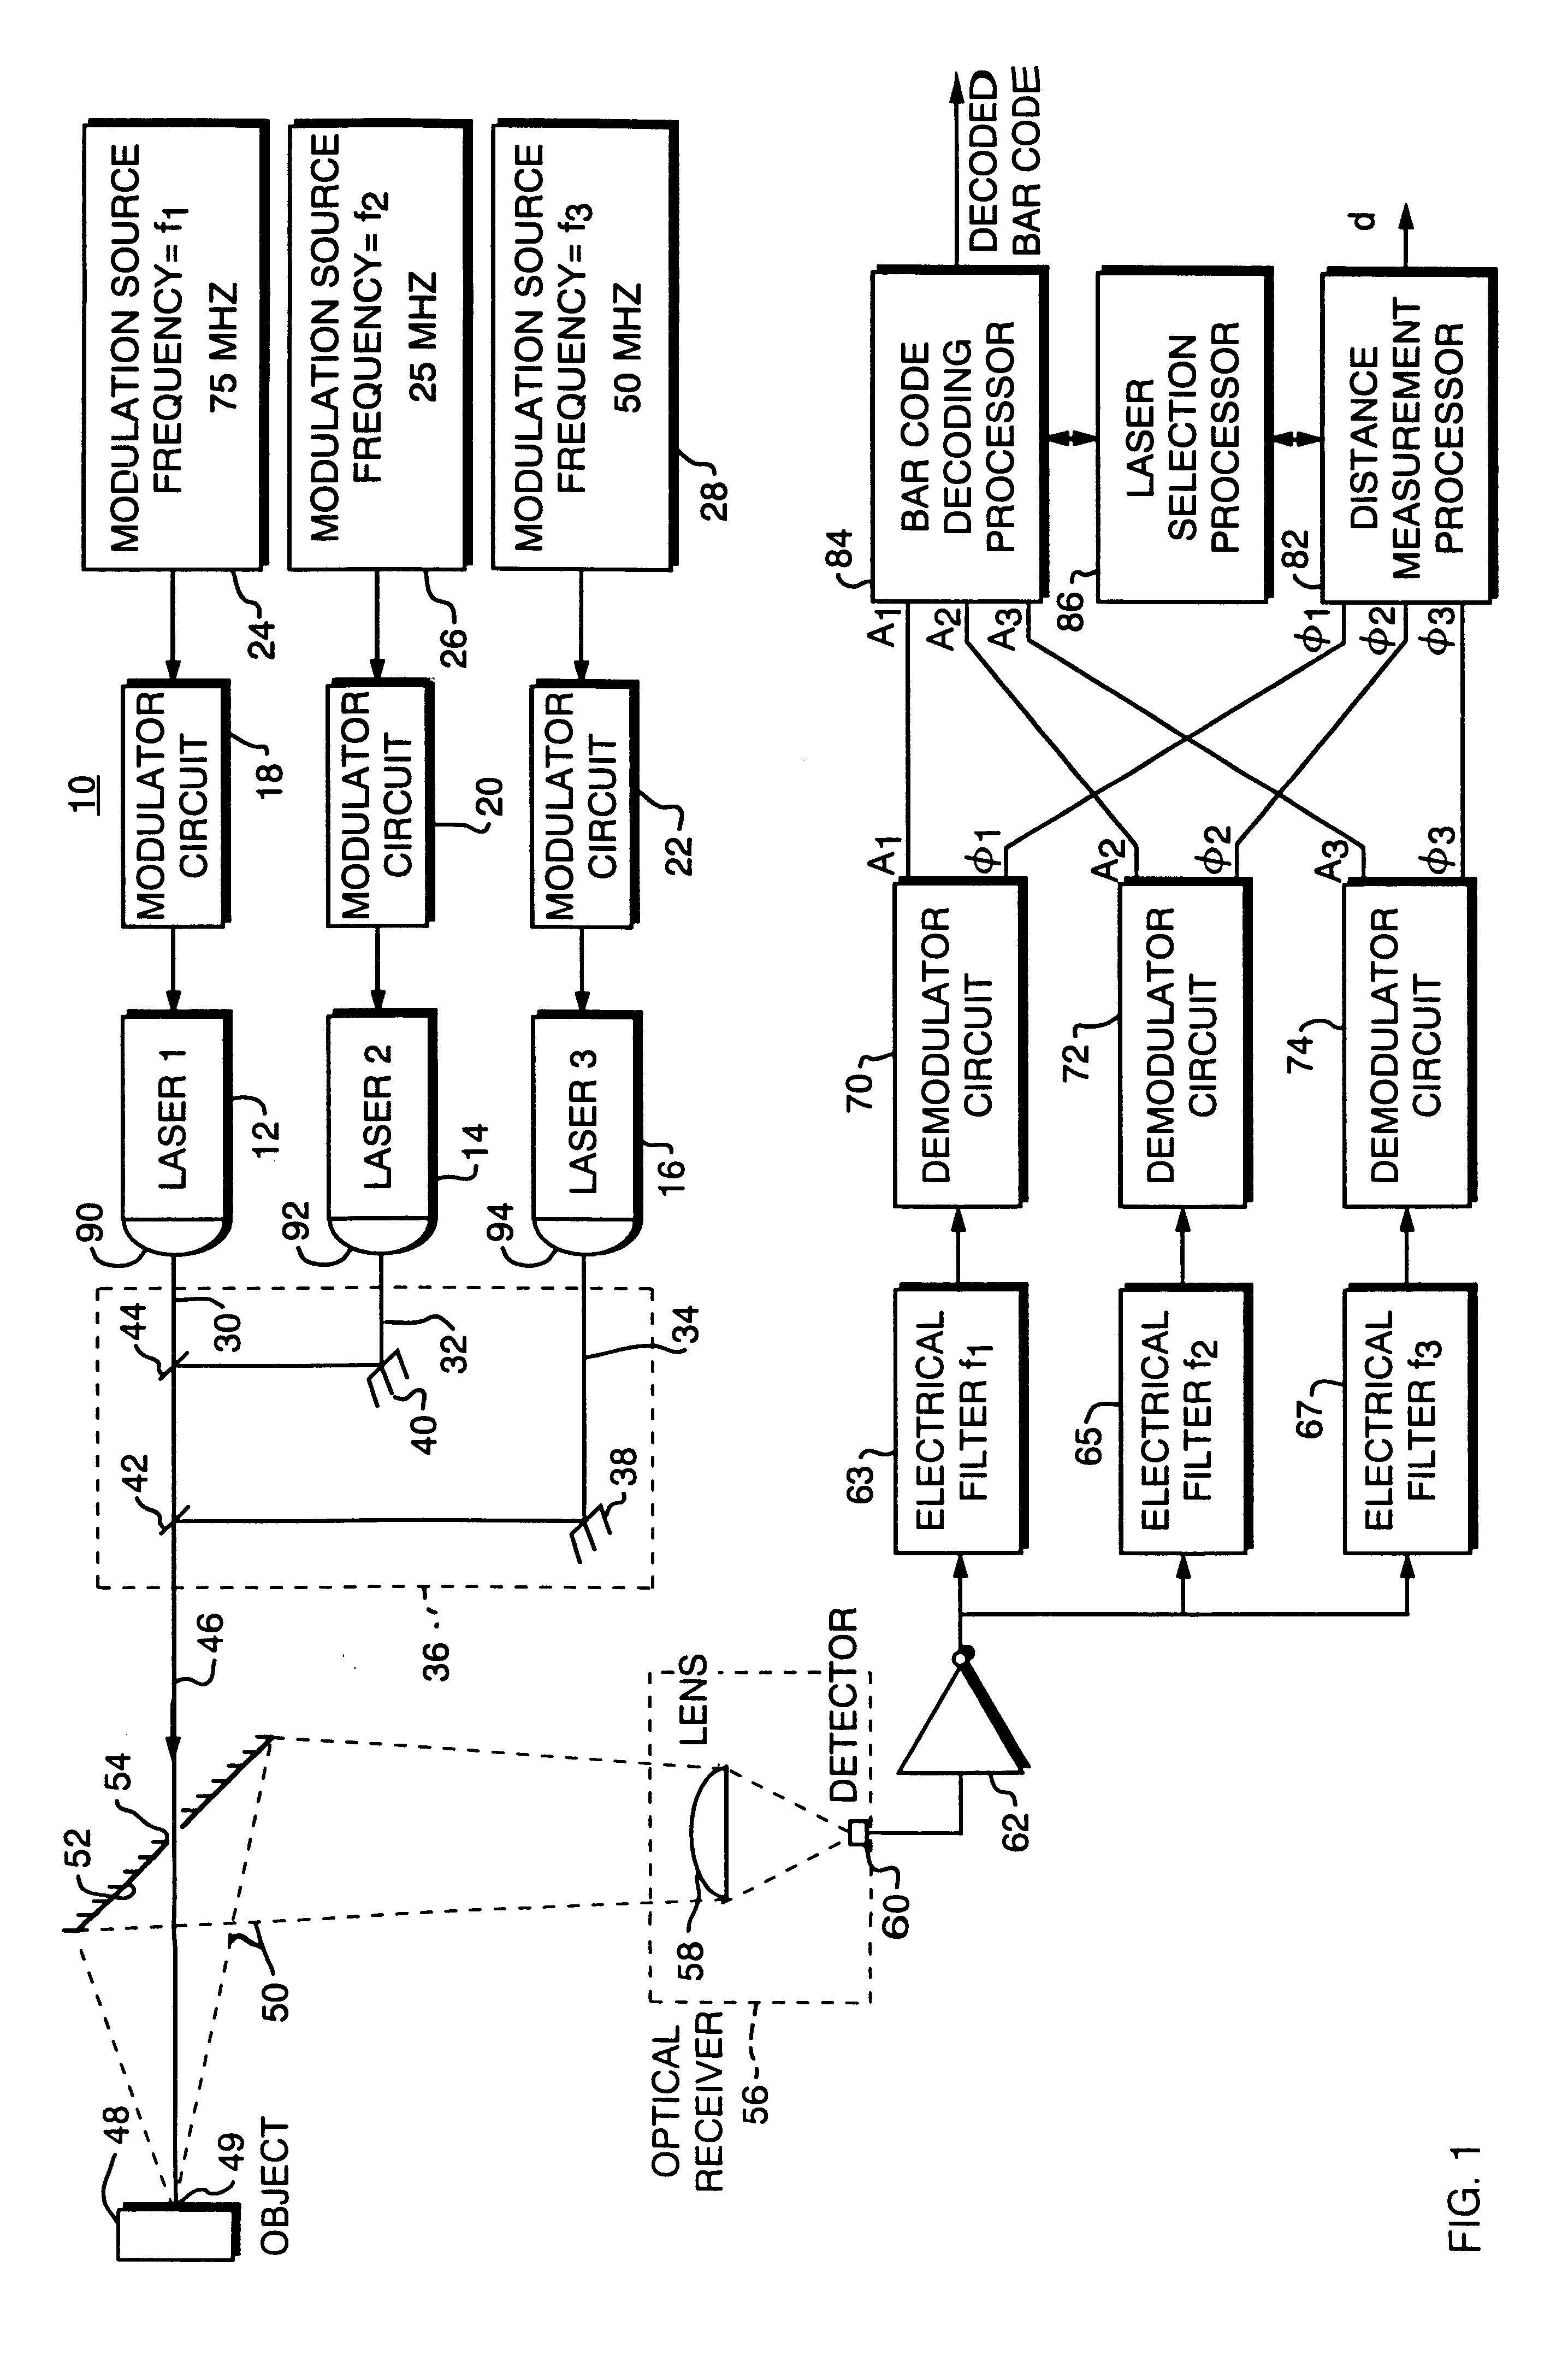 Frequency division multiplexed bar code scanner